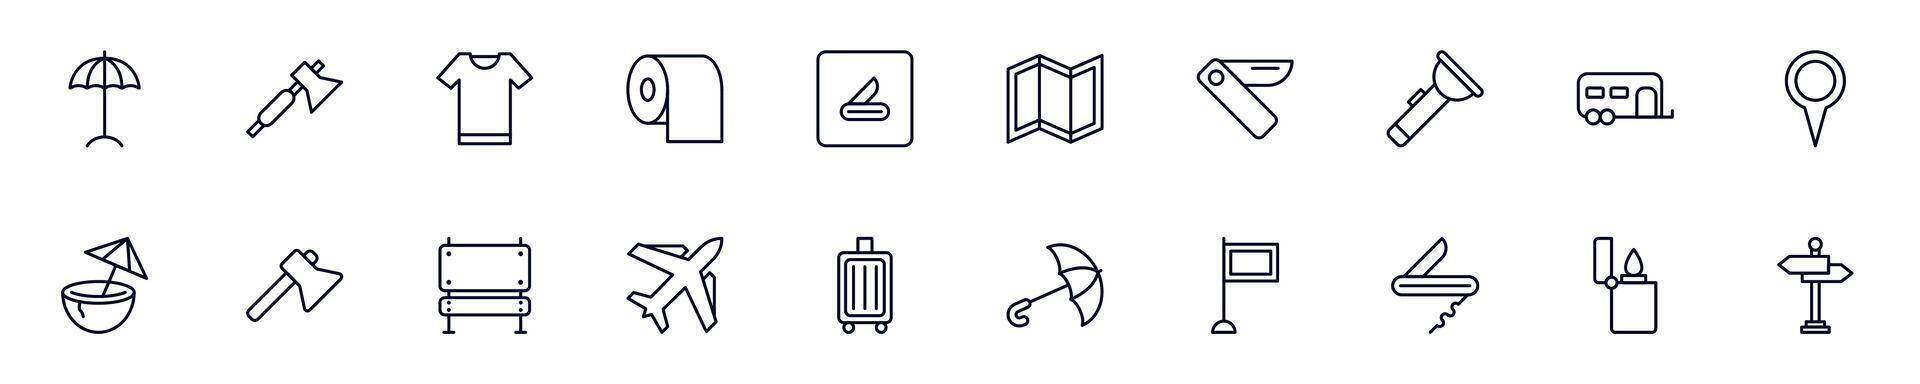 Collection of simple outline illustrations of travel, vacation, holiday. Modern line icons for apps, web sites, shops, stores vector